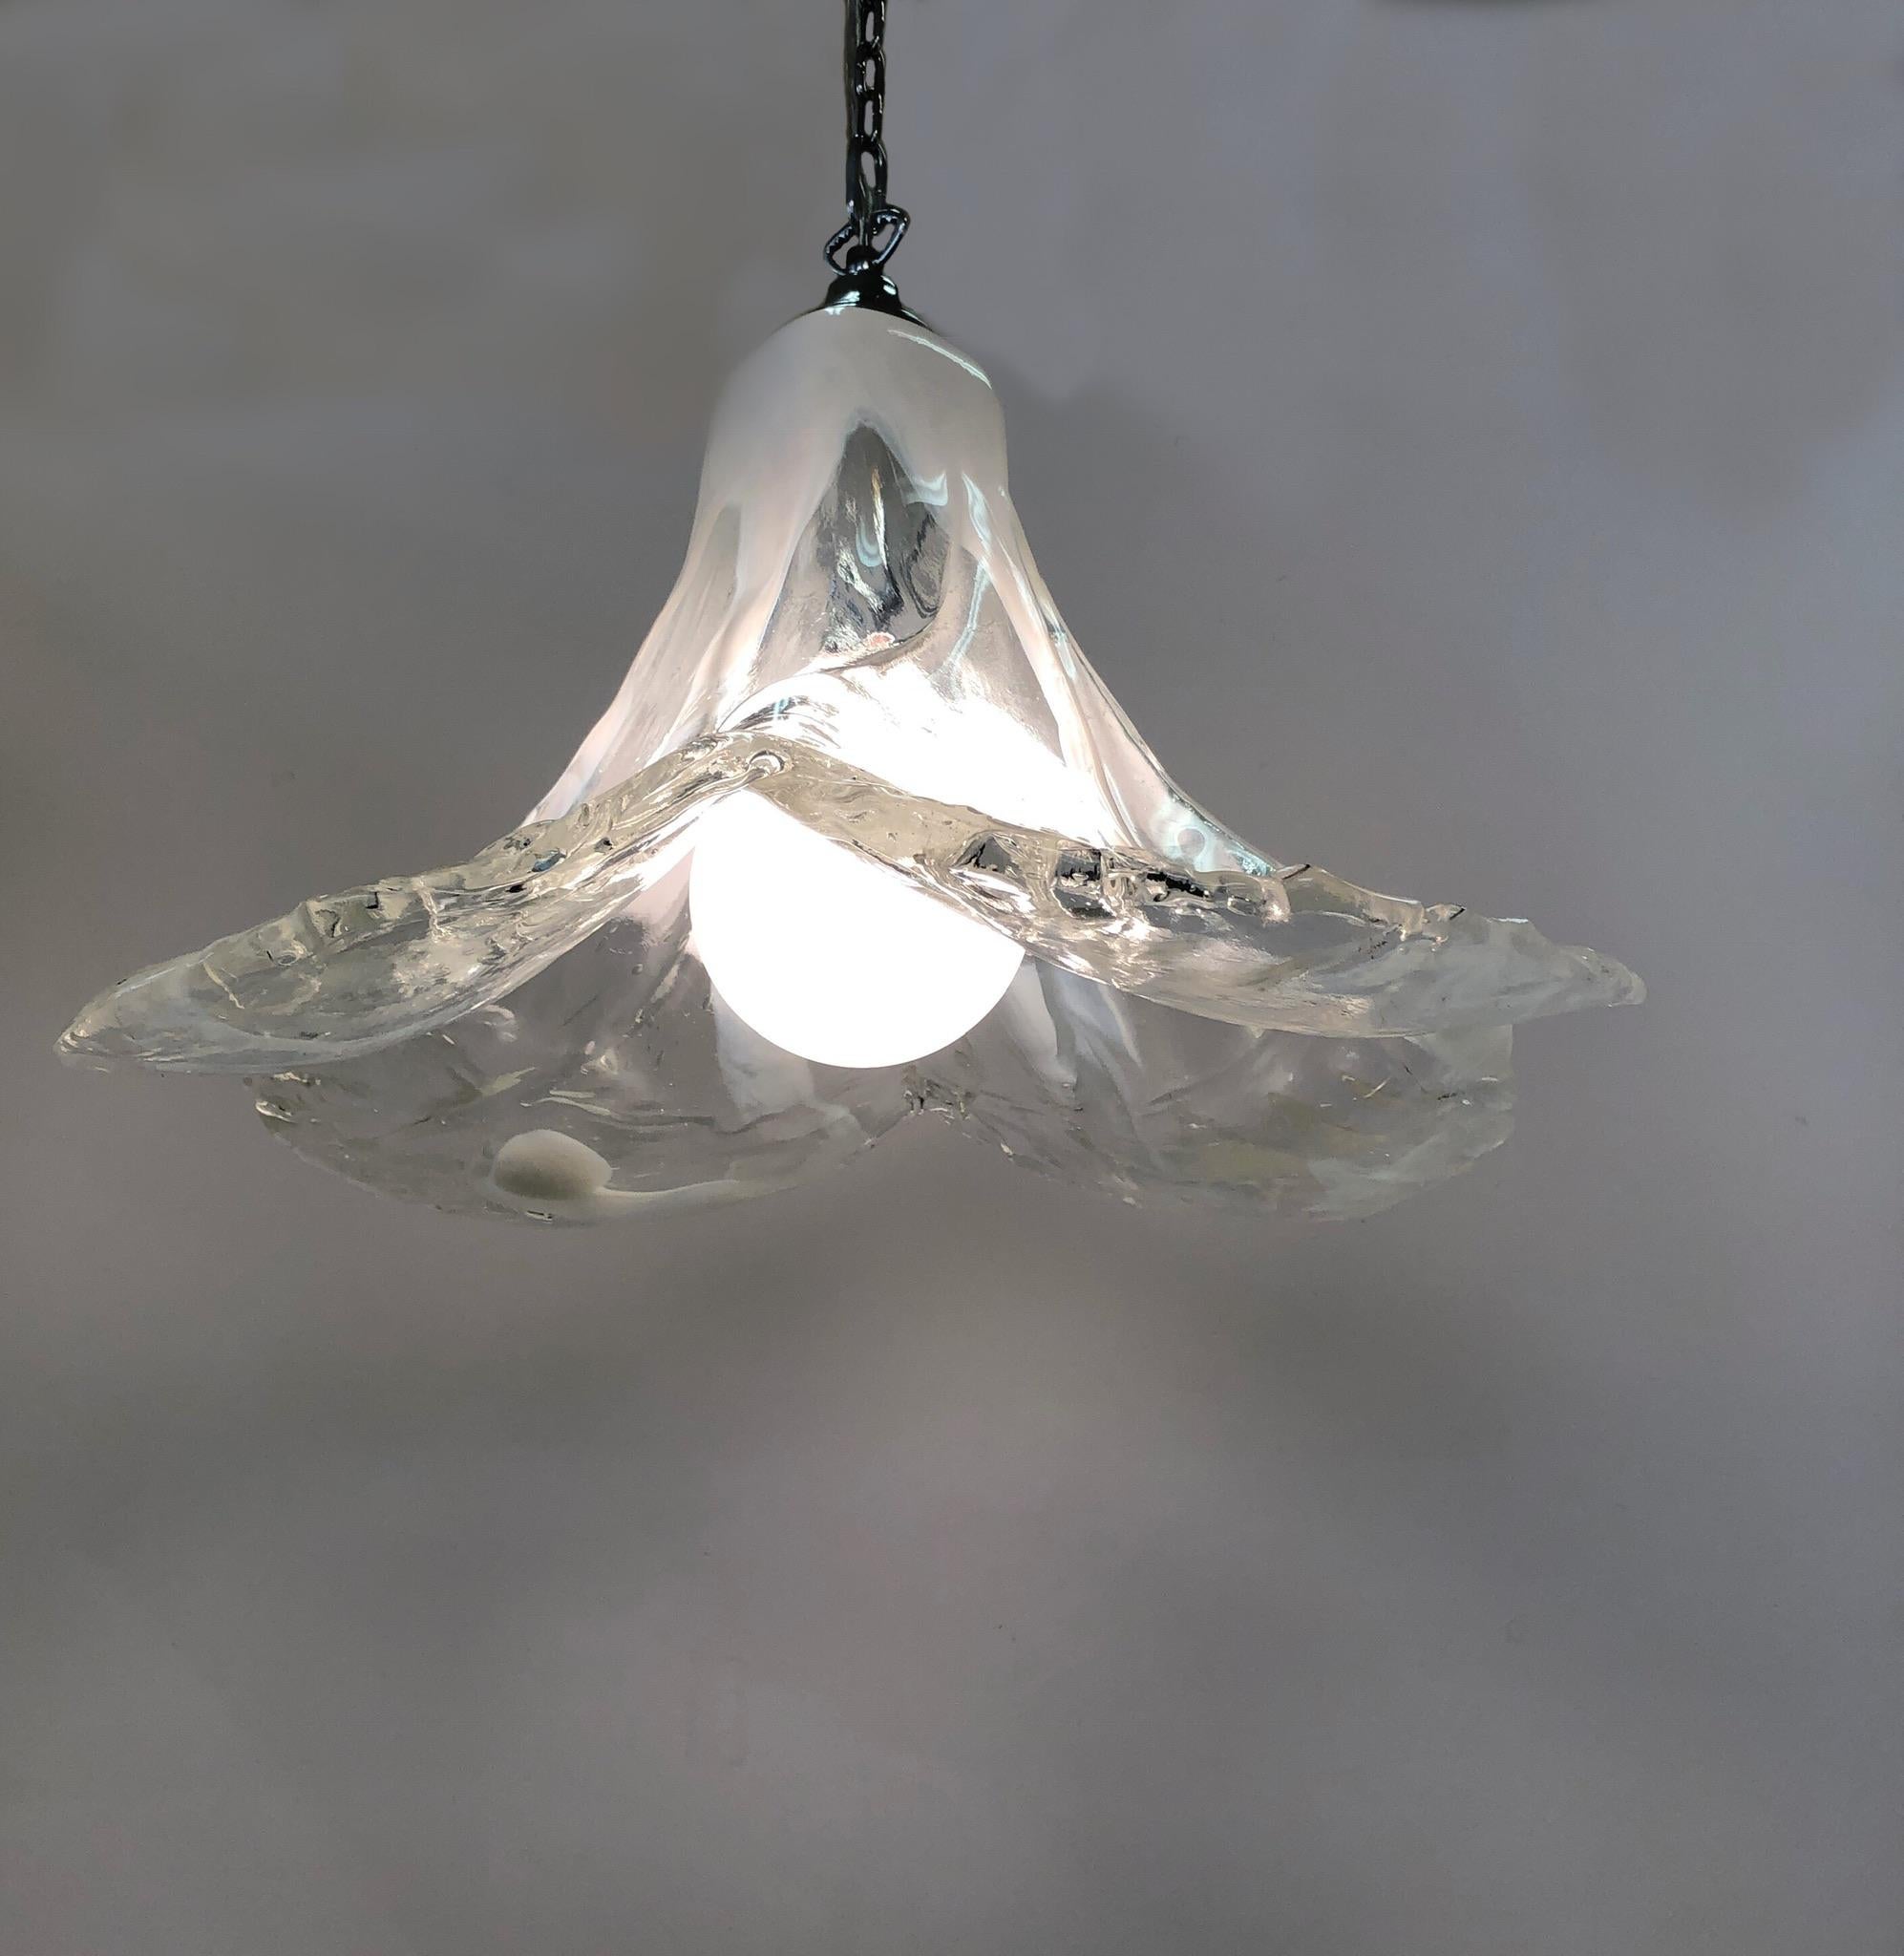 A spectacular had blown Italian Murano glass “Petalo” chandelier design by Carlo Nason for Mazzega in the 1960’s. This is an early “Petalo” chandelier, all one piece of hand blown clear and white Murano glass. The chandelier has been newly